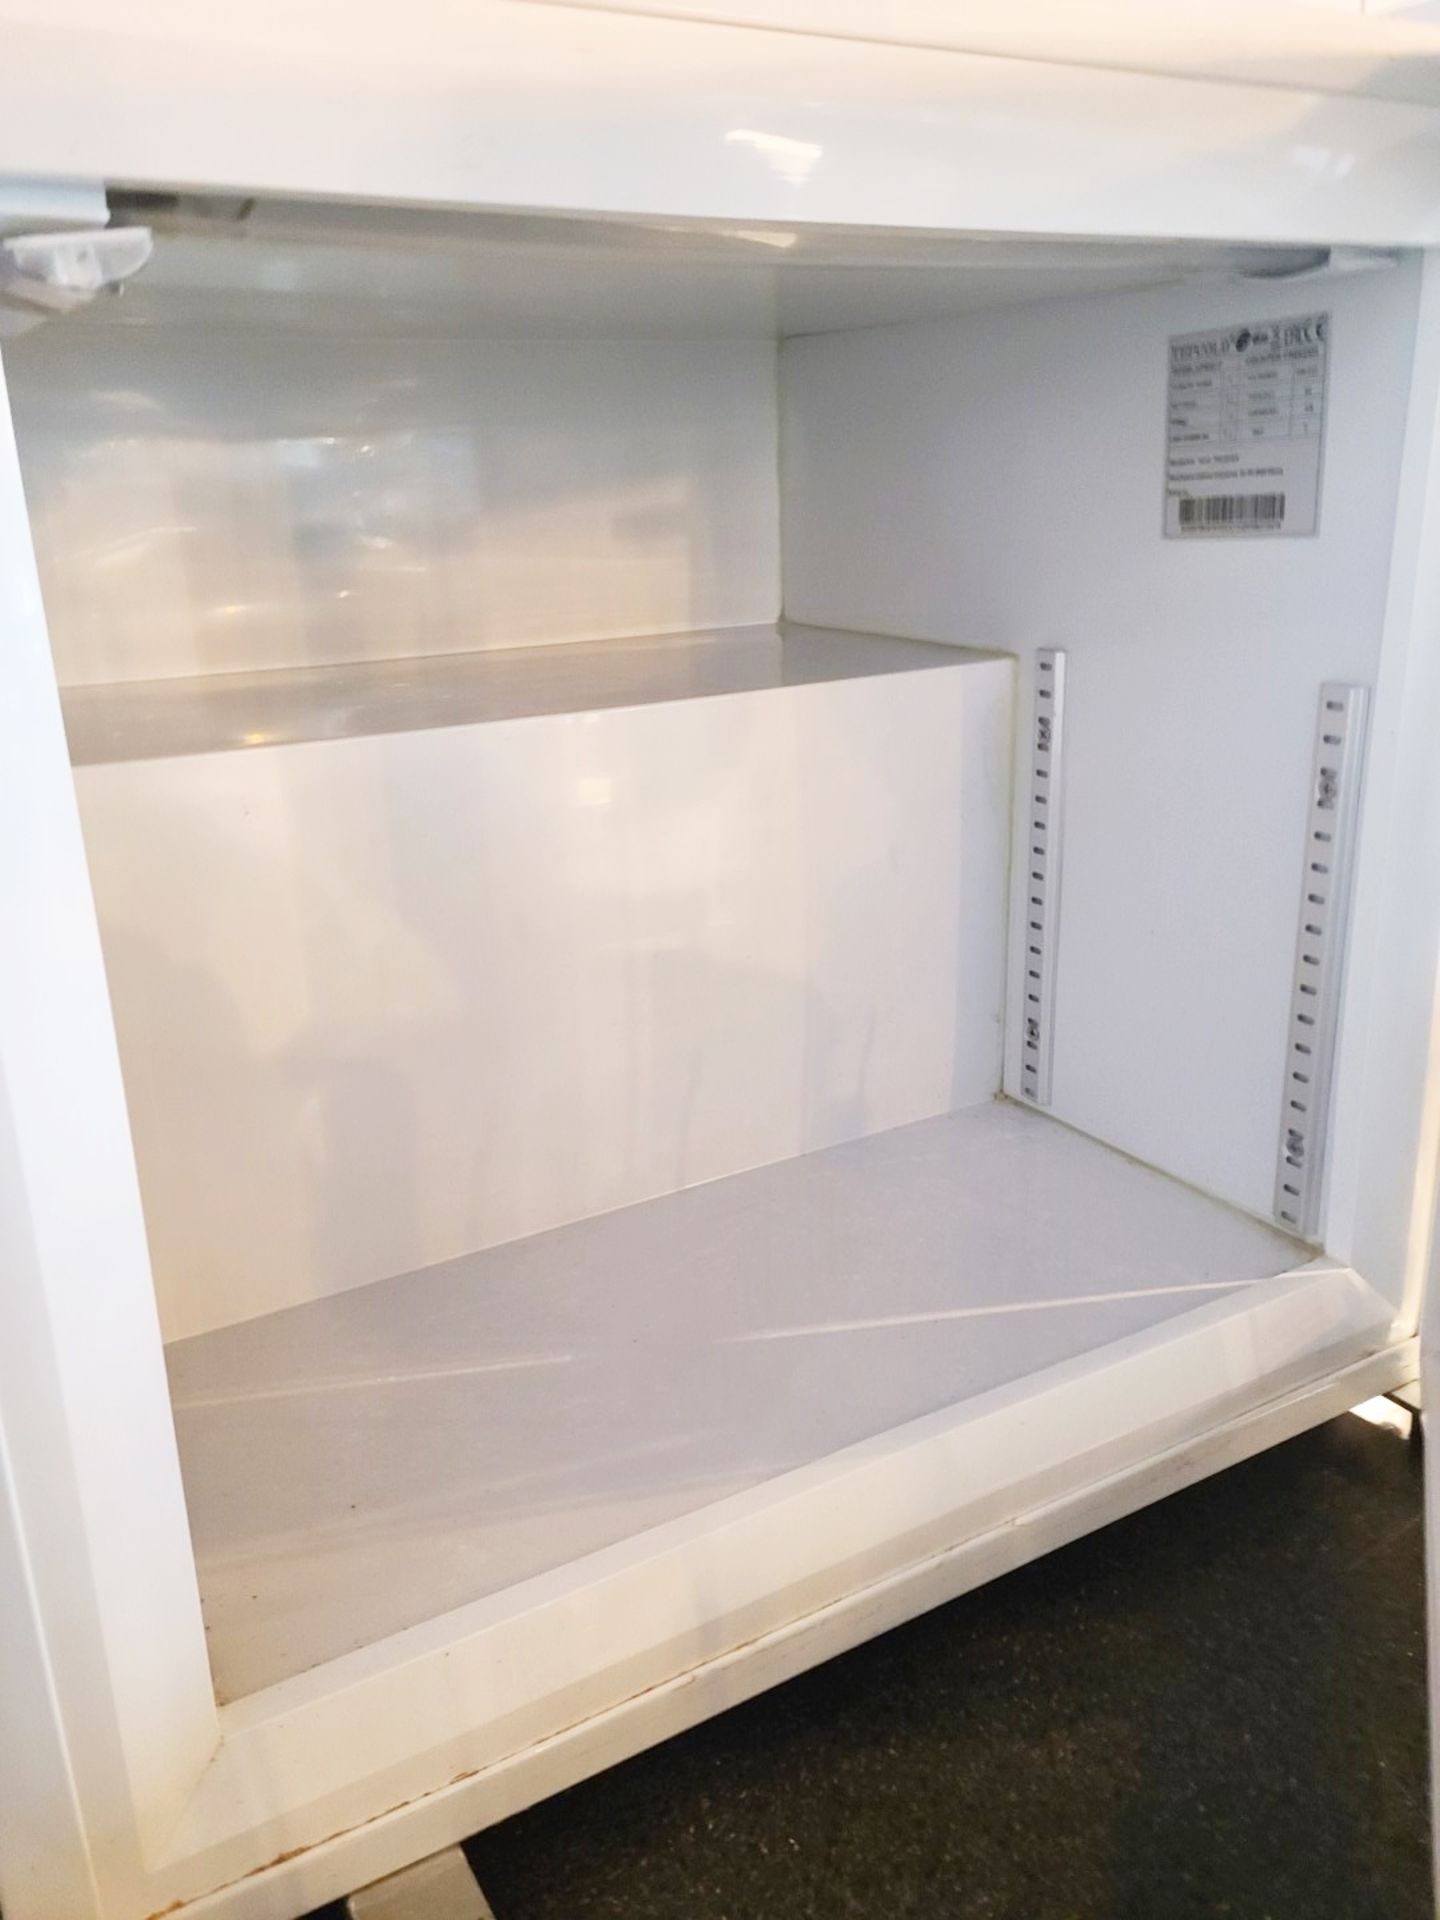 1 x TELFORD White Counter Top Fridge With Hinged Door and Adjustable Feet 60cm x 50cm - Image 5 of 7